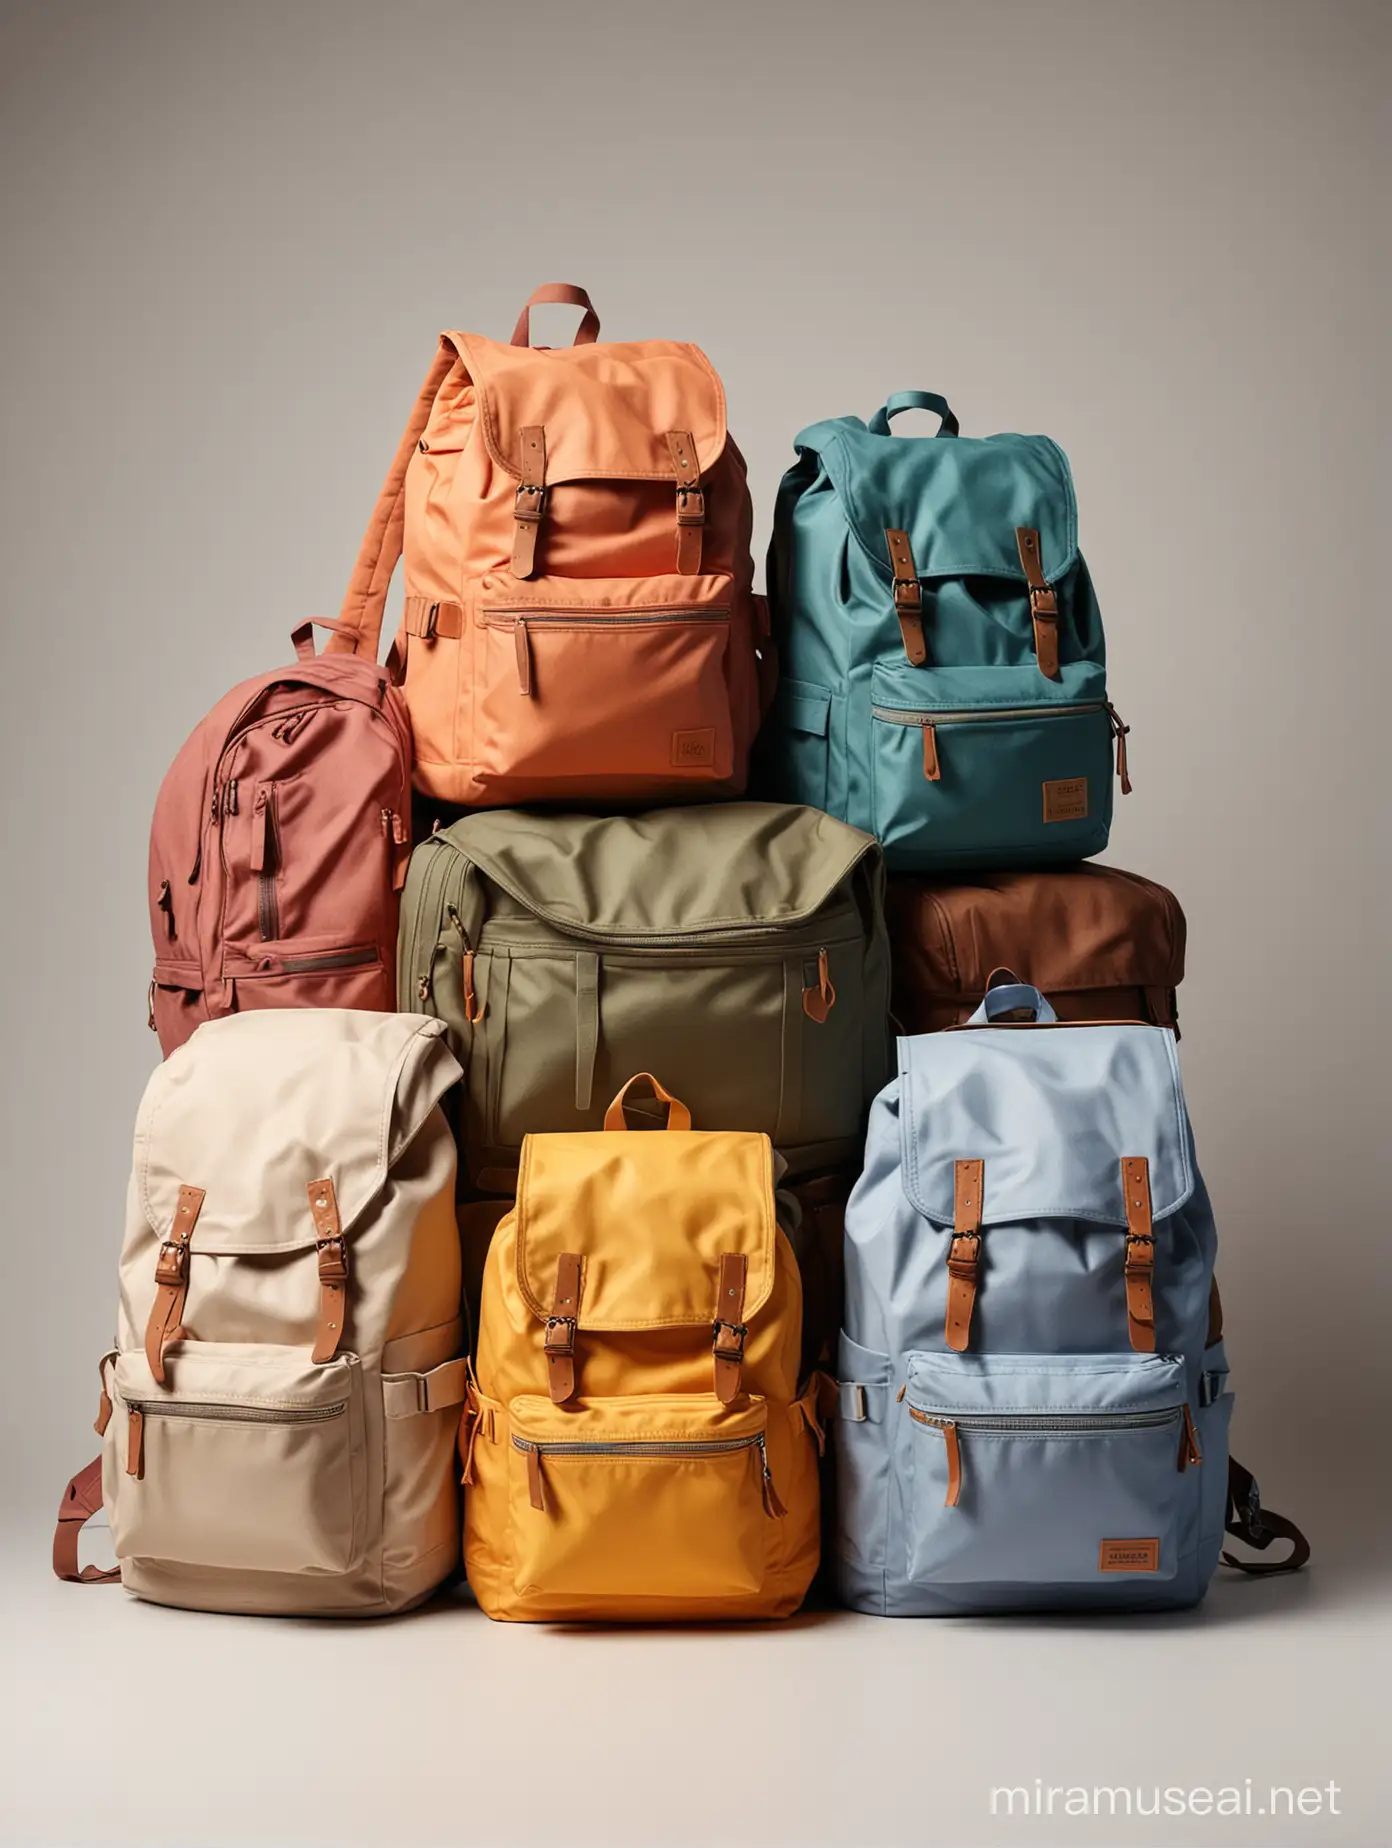 Four Colorful Backpacks on Bright Background